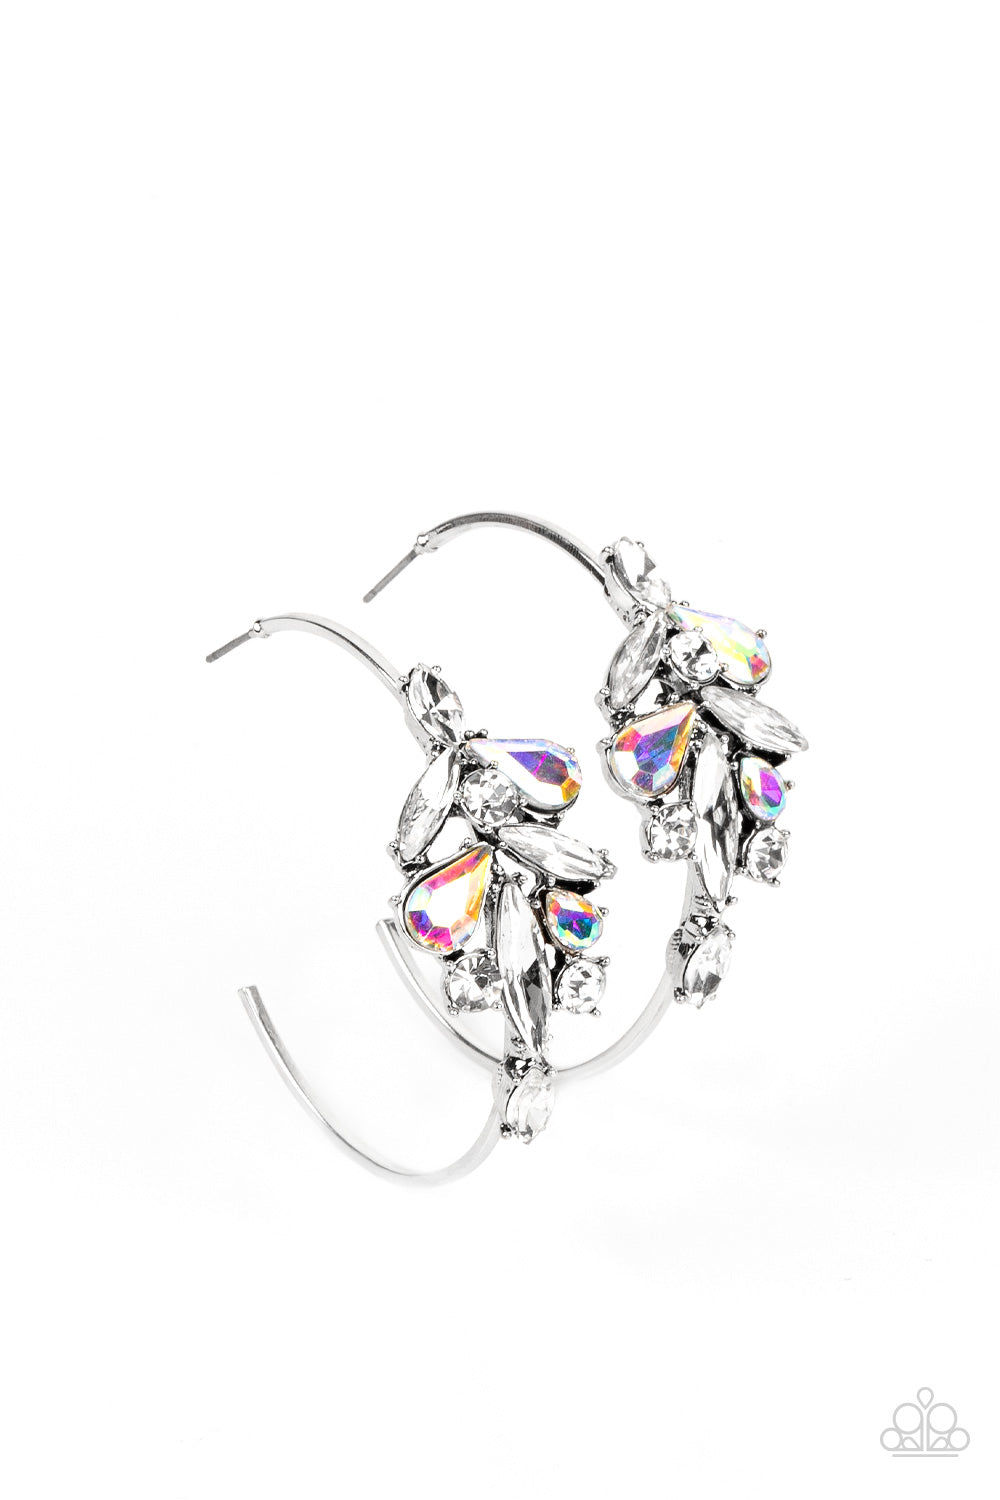 Arctic Attitude Multi Hoop Earring - Paparazzi Accessories  Featuring icy white and iridescent finishes, a fragmented cluster of teardrop, marquise, and round gems attach to a smooth silver hoop. Set in pronged fittings, the glittery gems create instant edge and attitude. Earring attaches to a standard post fitting. Hoop measures approximately 2" in diameter.  Sold as one pair of hoop earrings.